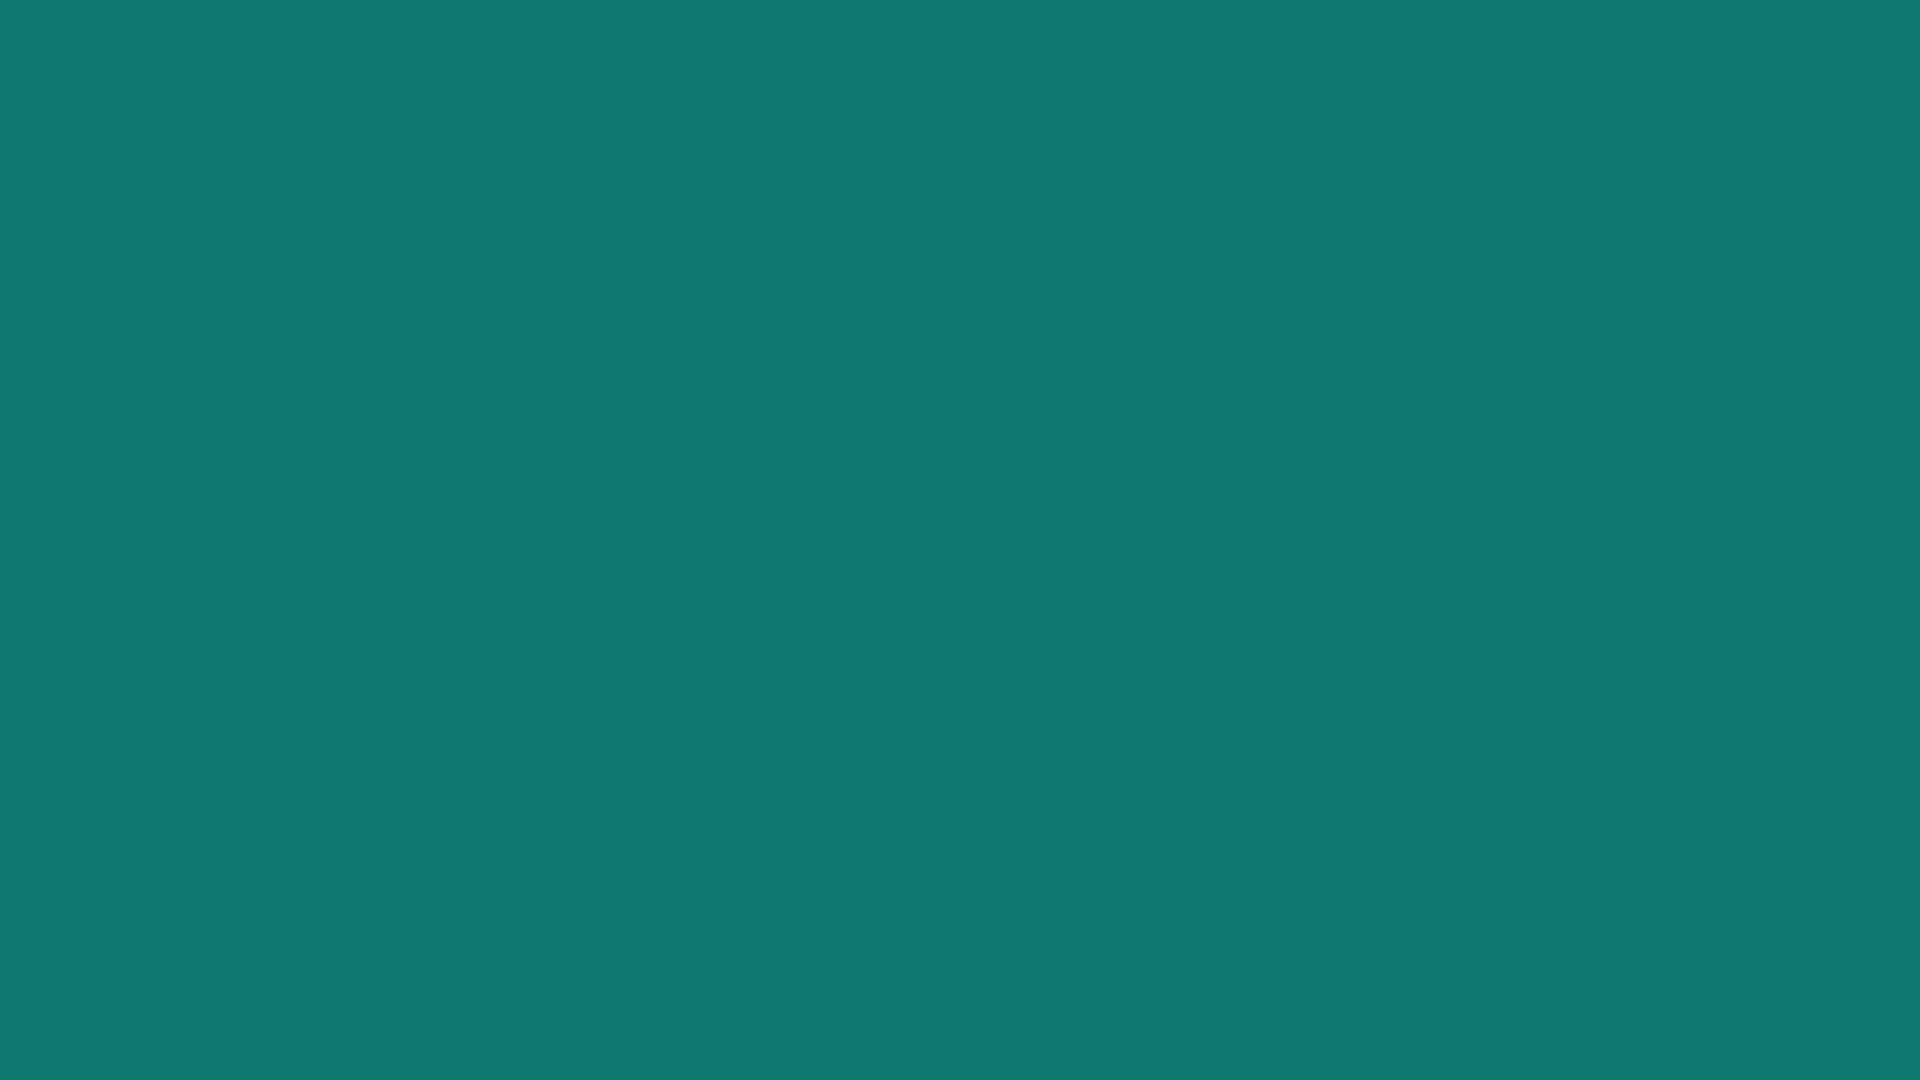 Pine Green Solid Color Background